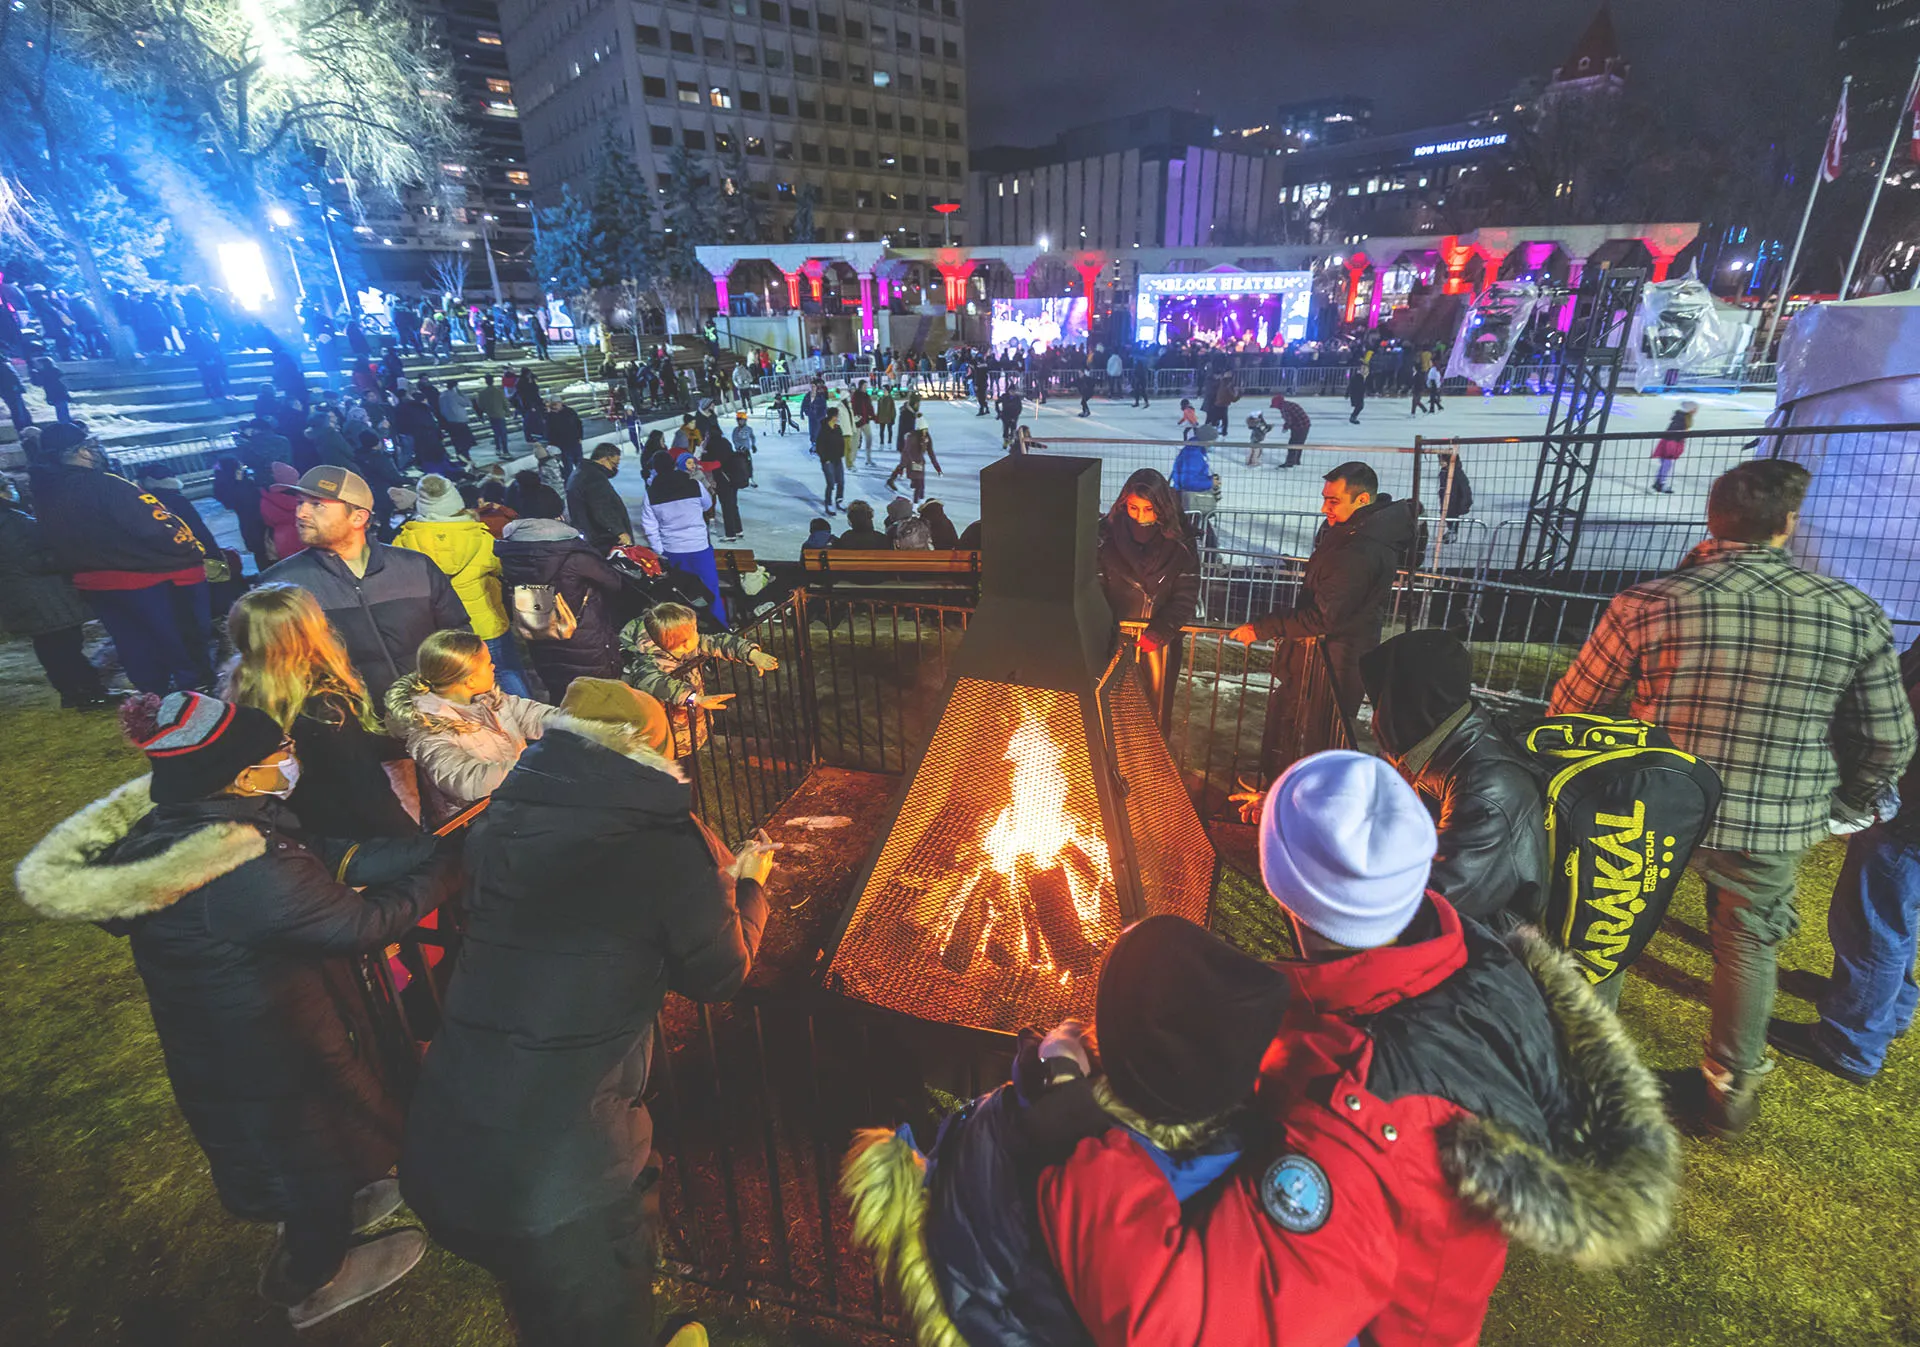 groups of people enjoy skating, warming up by a fire pit, and live music during Block Heater in Olympic Plaza